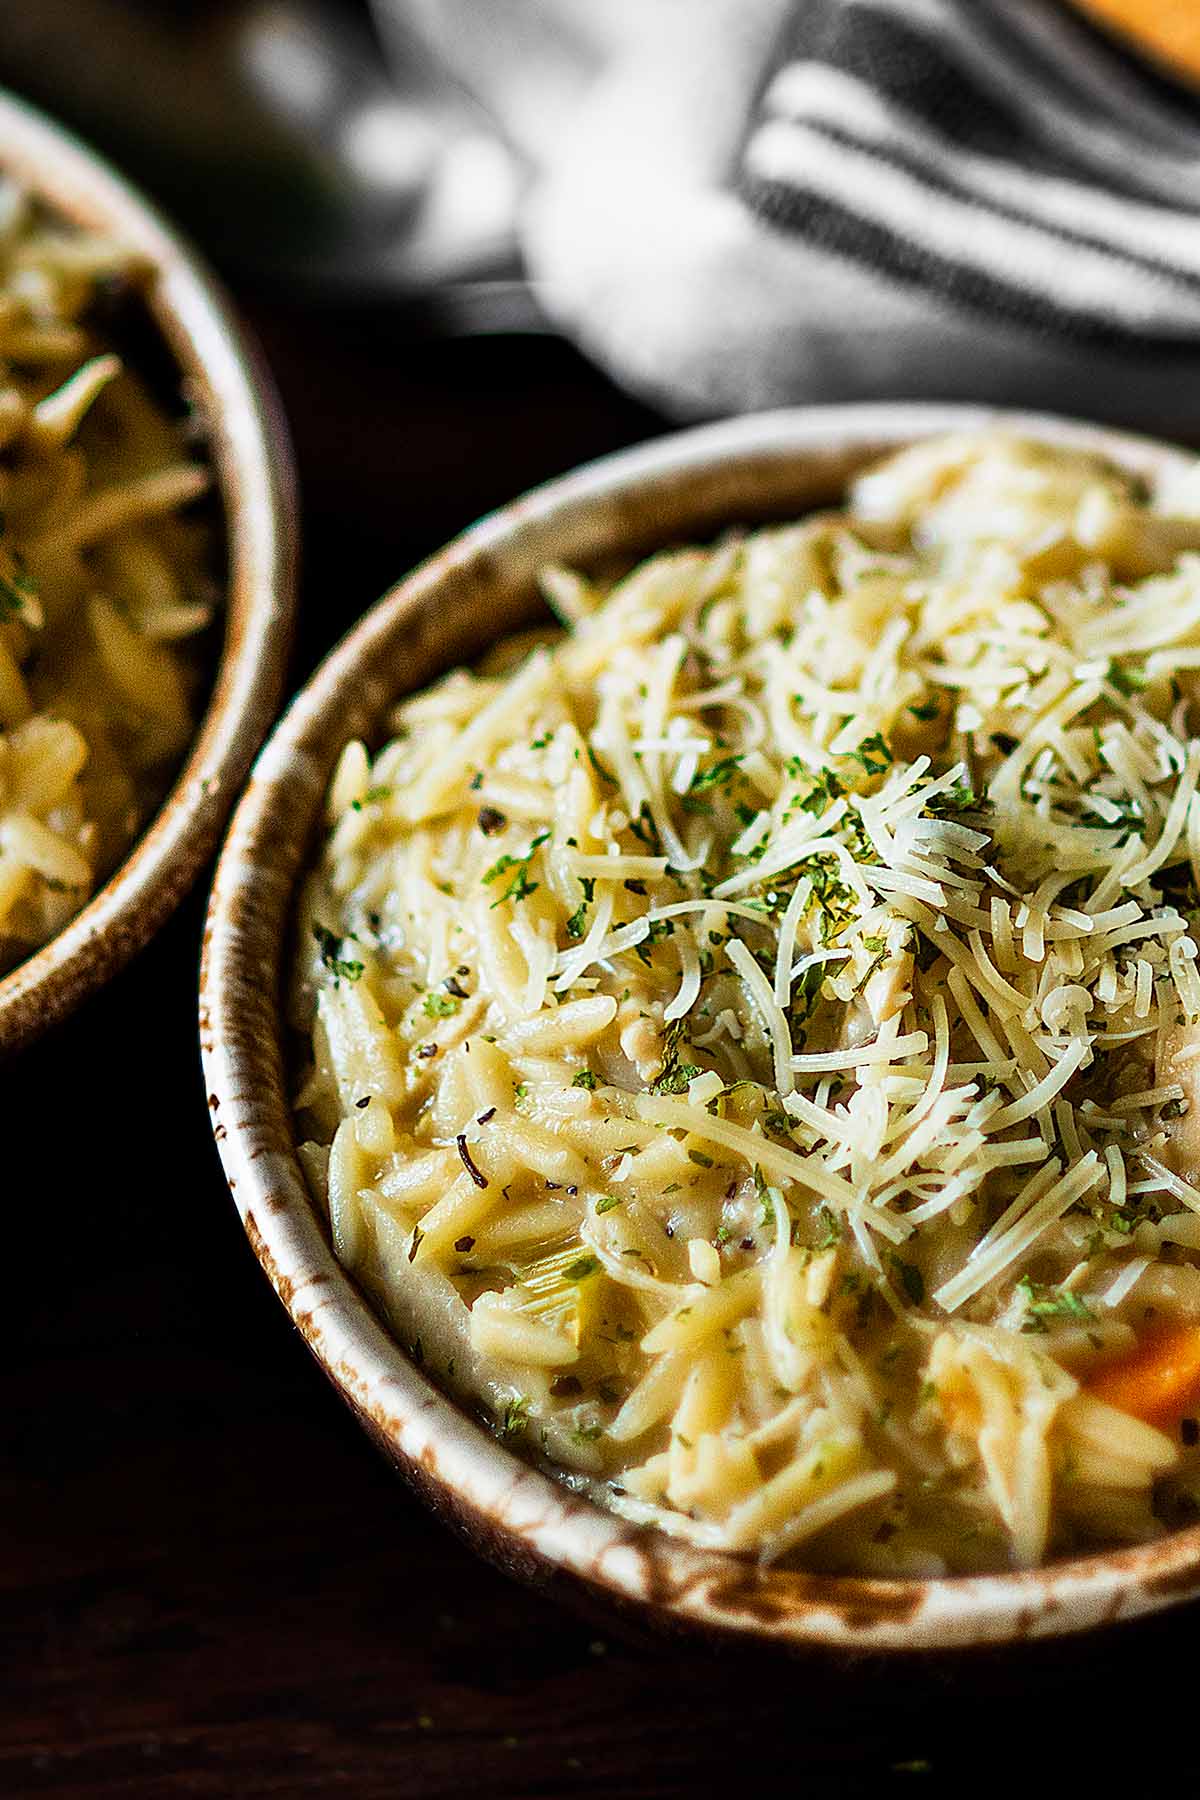 Chicken orzo soup served in rustic brown and white bowls.